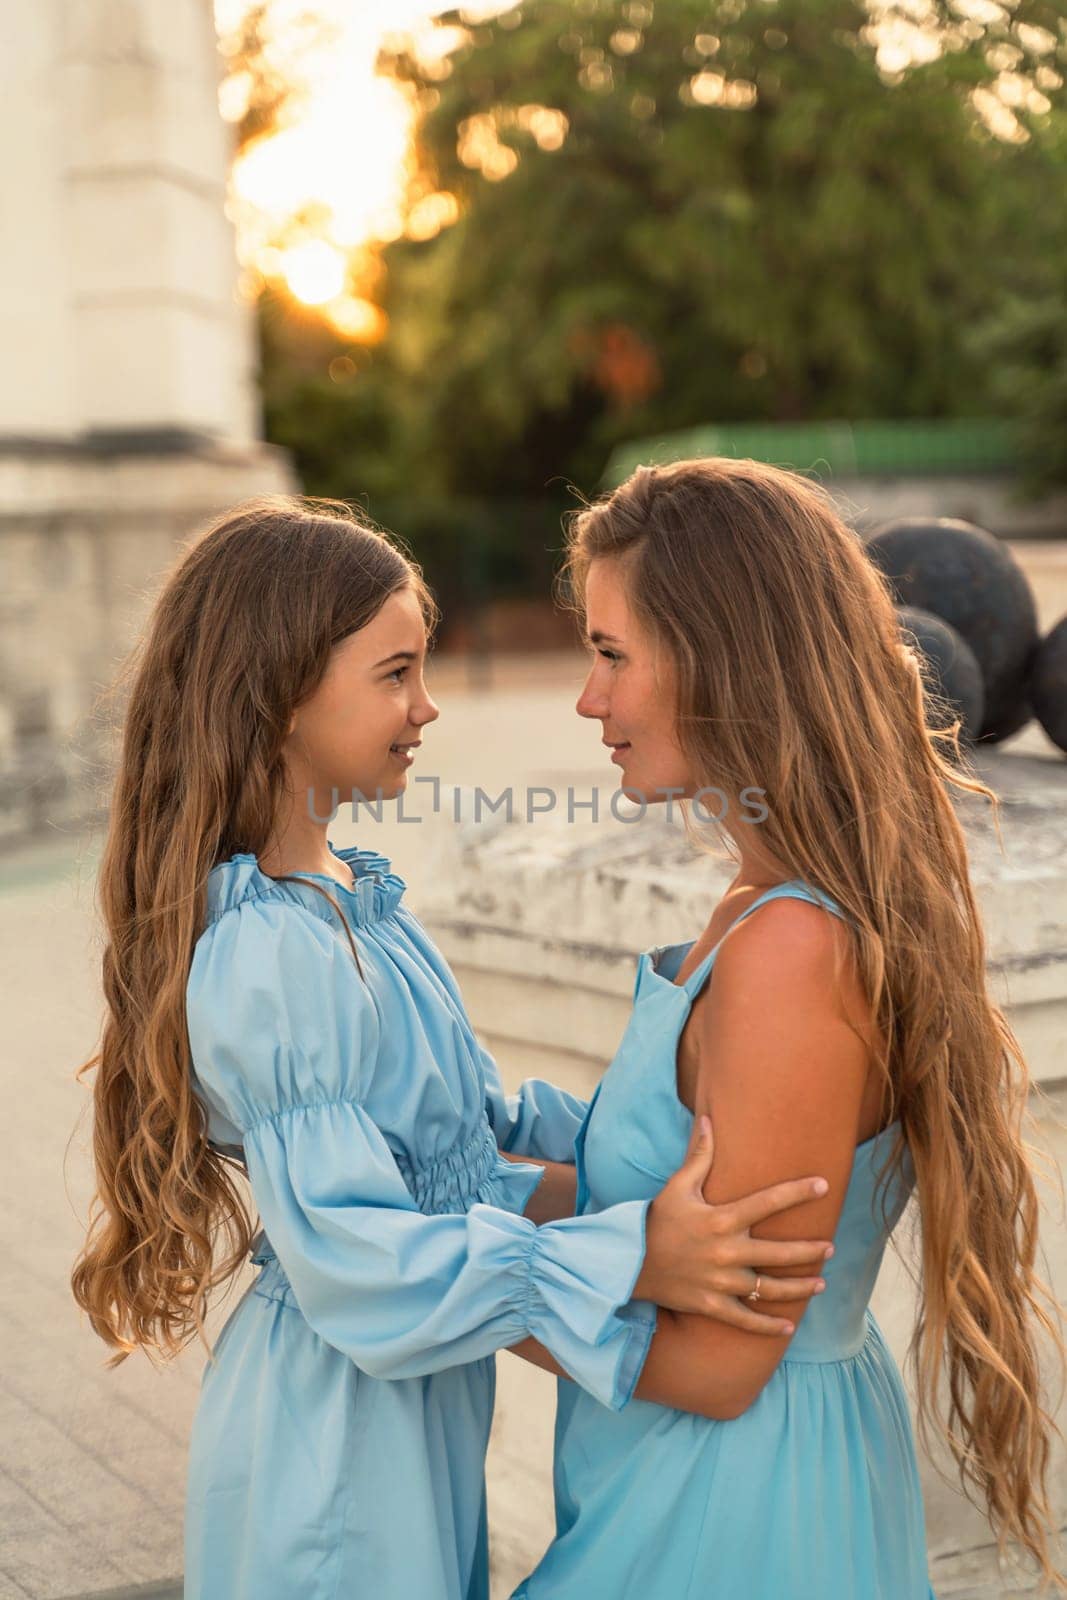 Portrait of a mother and daughter in blue dresses with flowing long hair against the backdrop of a sunset and a white building. They look at each other. Family stories on the weekend.